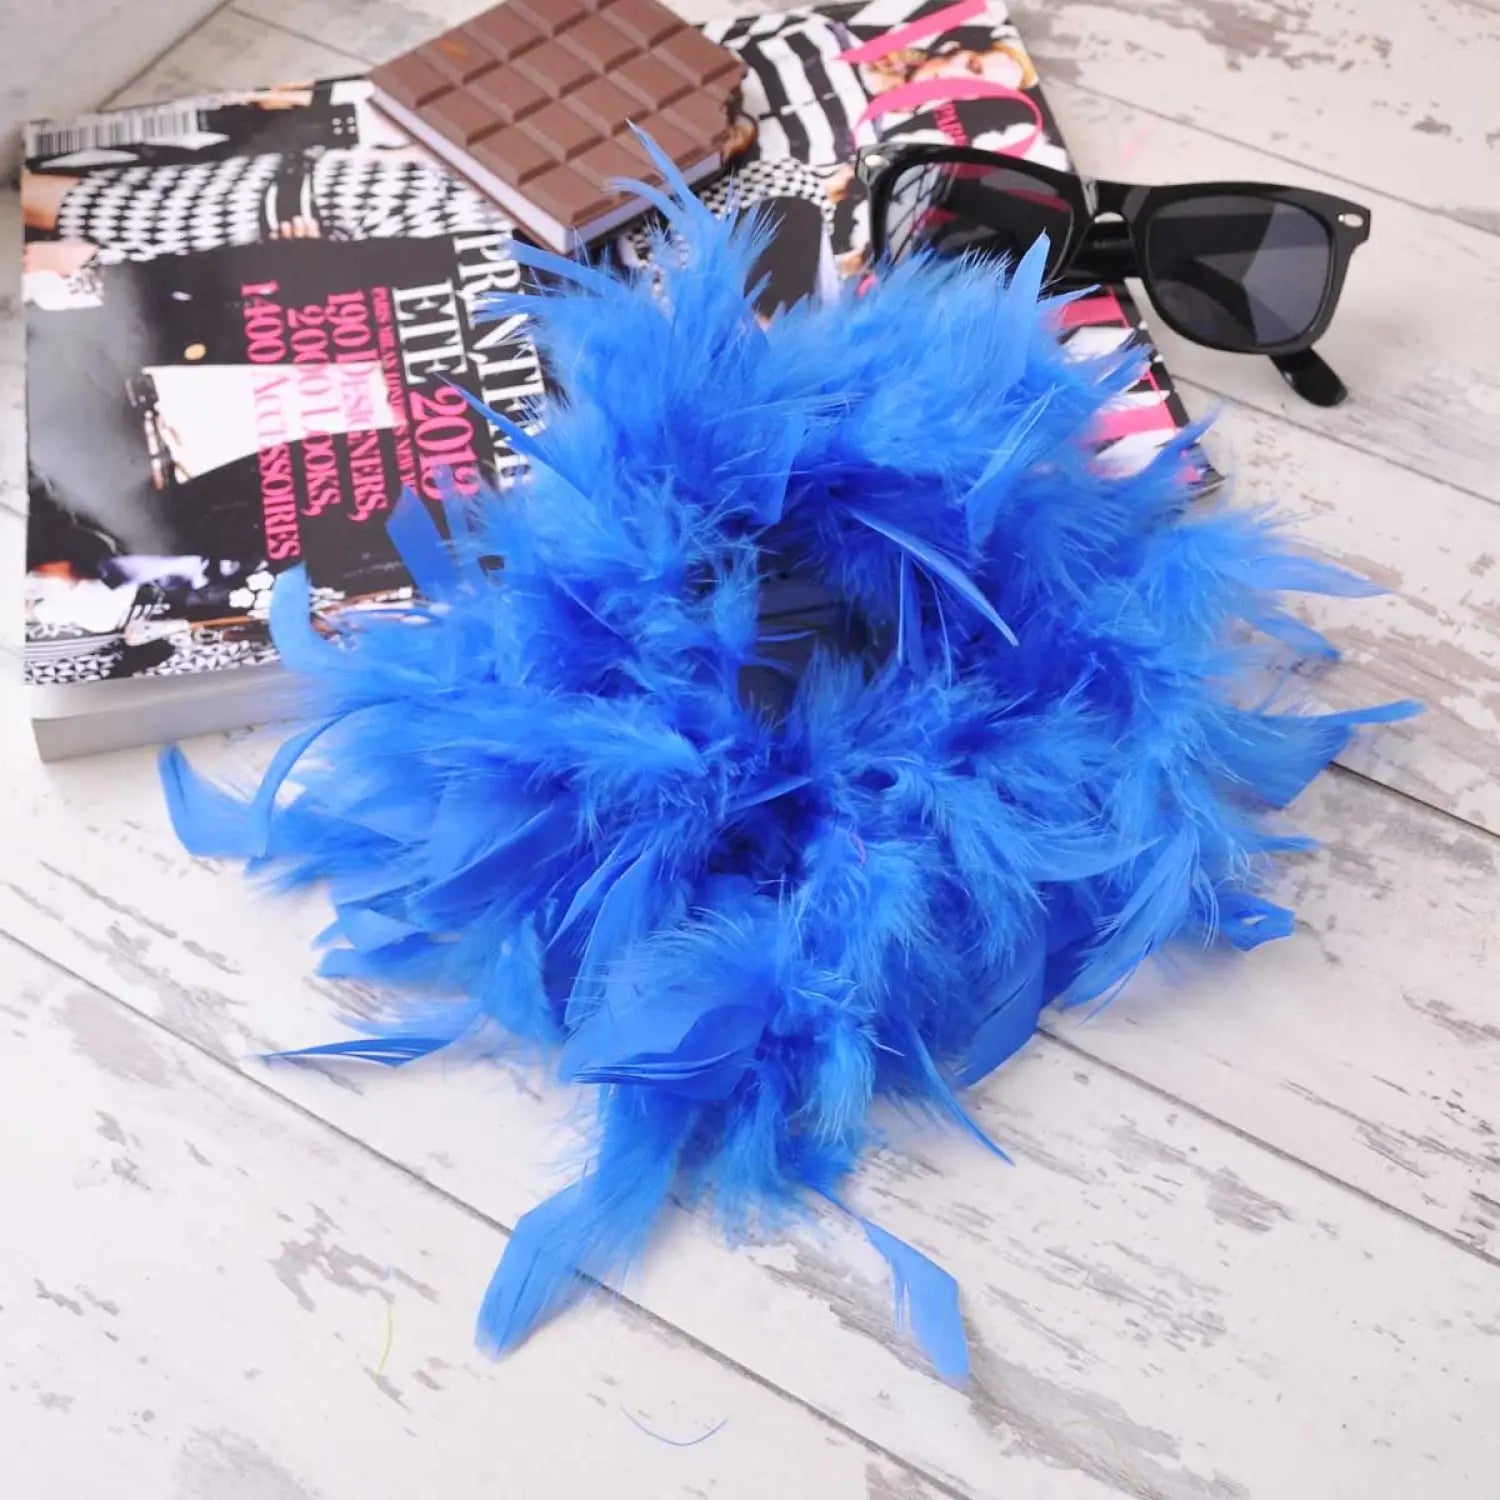 Blue feather hair scrunchie with book and sunglasses, Bright, Colourful, Unique.